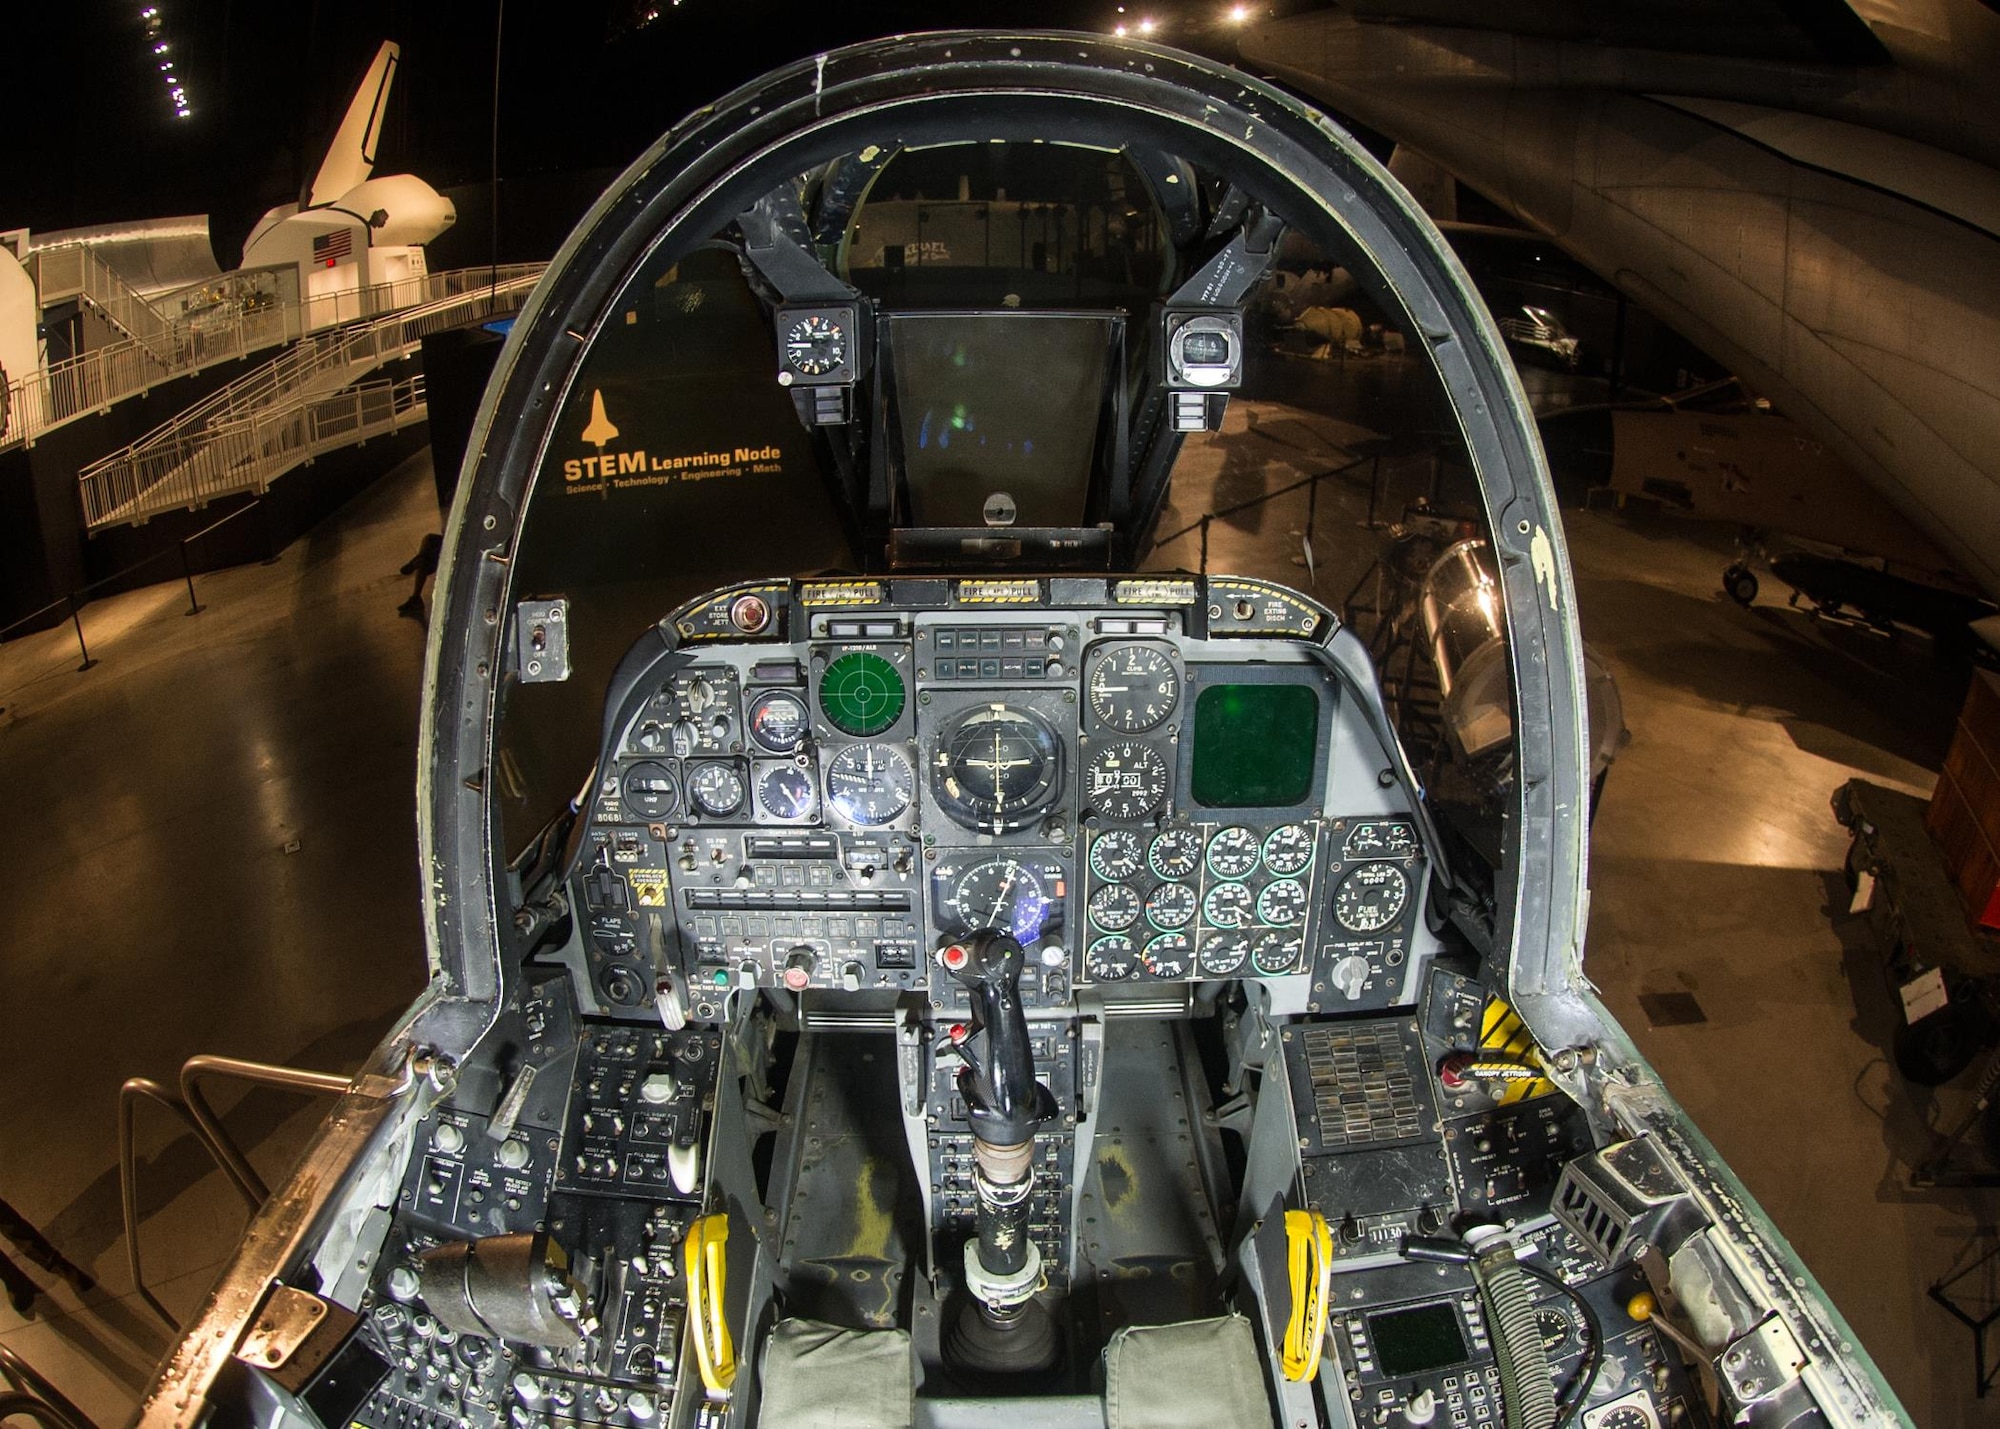 DAYTON, Ohio - Fairchild Republic A-10A Thunderbolt II cockpit at the National Museum of the U.S. Air Force. (U.S. Air Force photo)